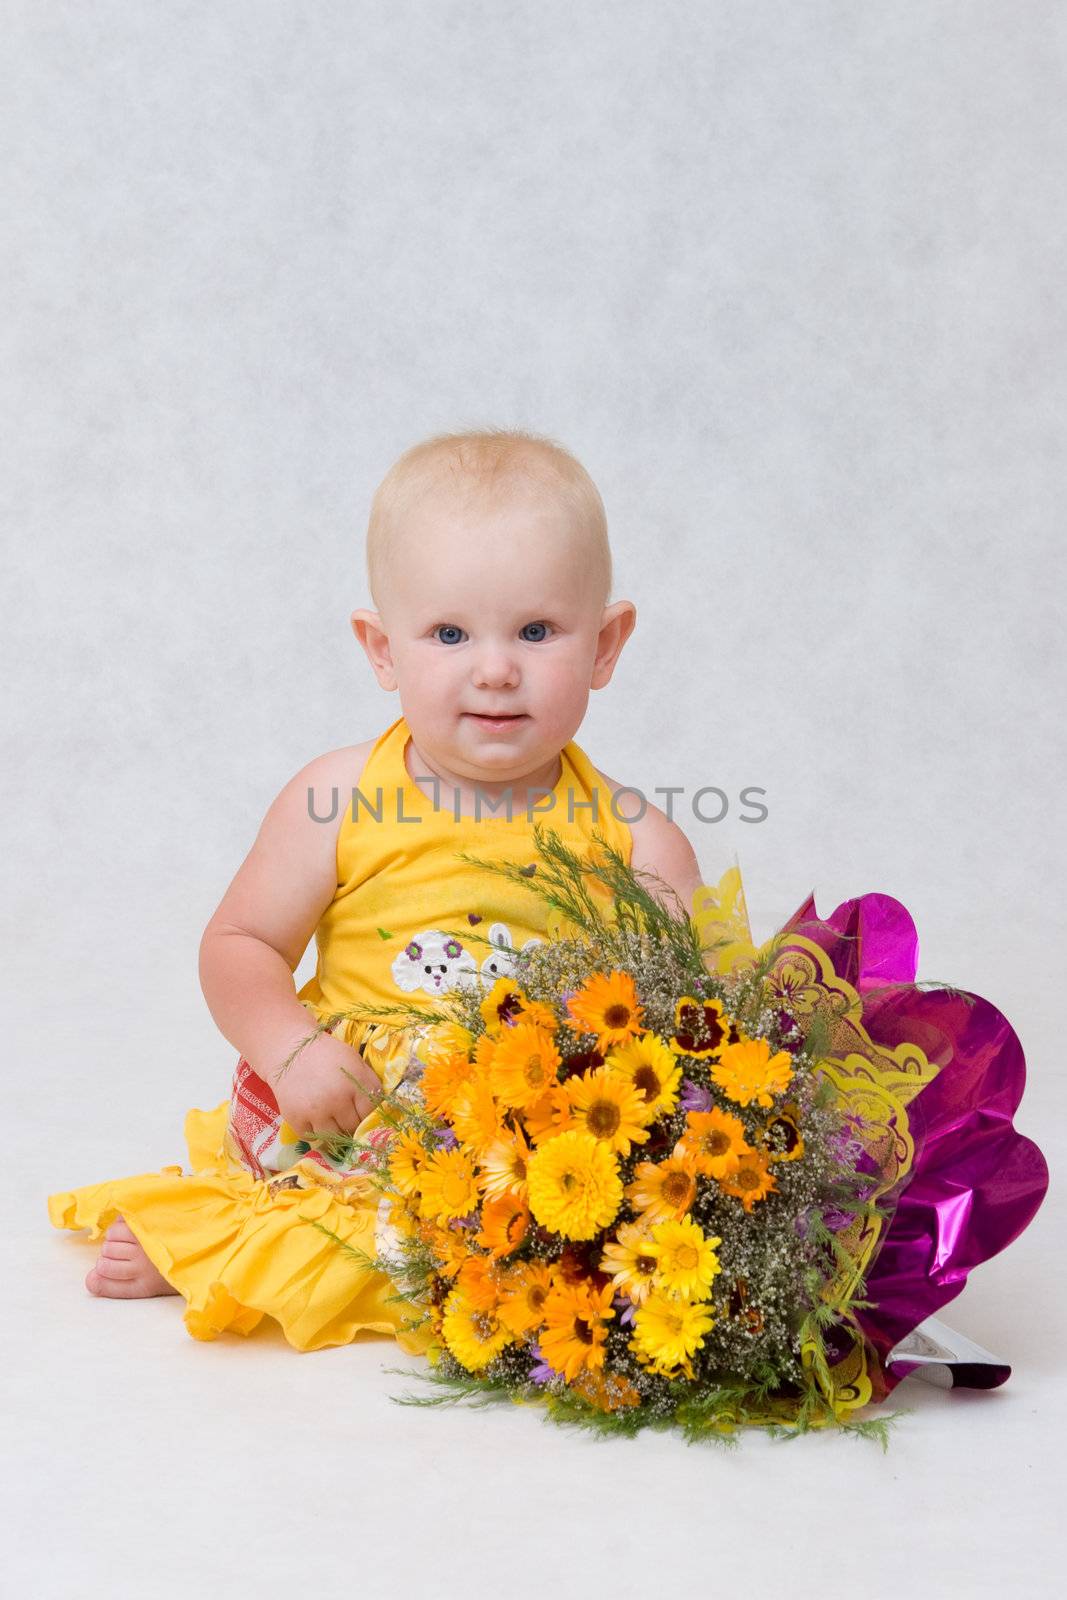 a small girl with a great flower bouquet by vsurkov